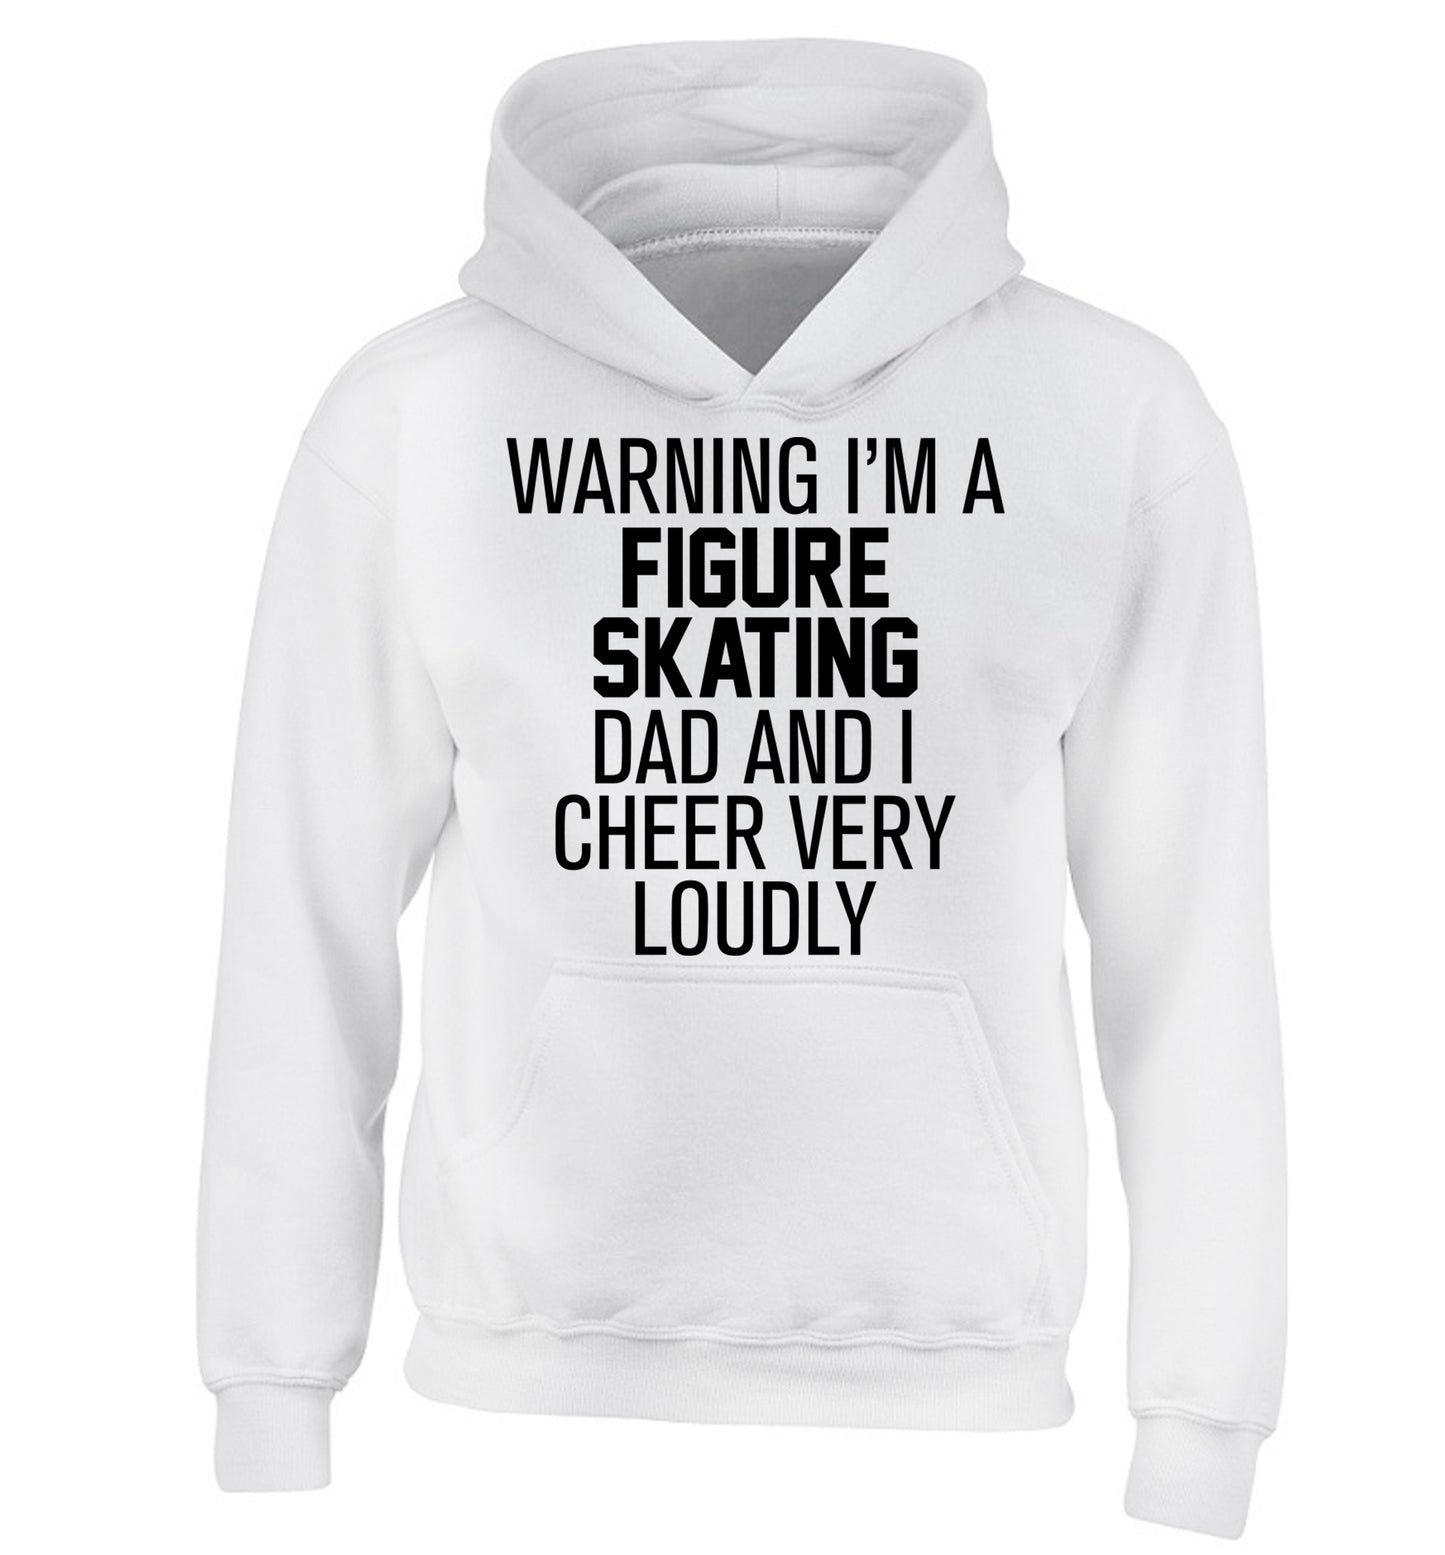 Warning I'm a figure skating dad and I cheer very loudly children's white hoodie 12-14 Years